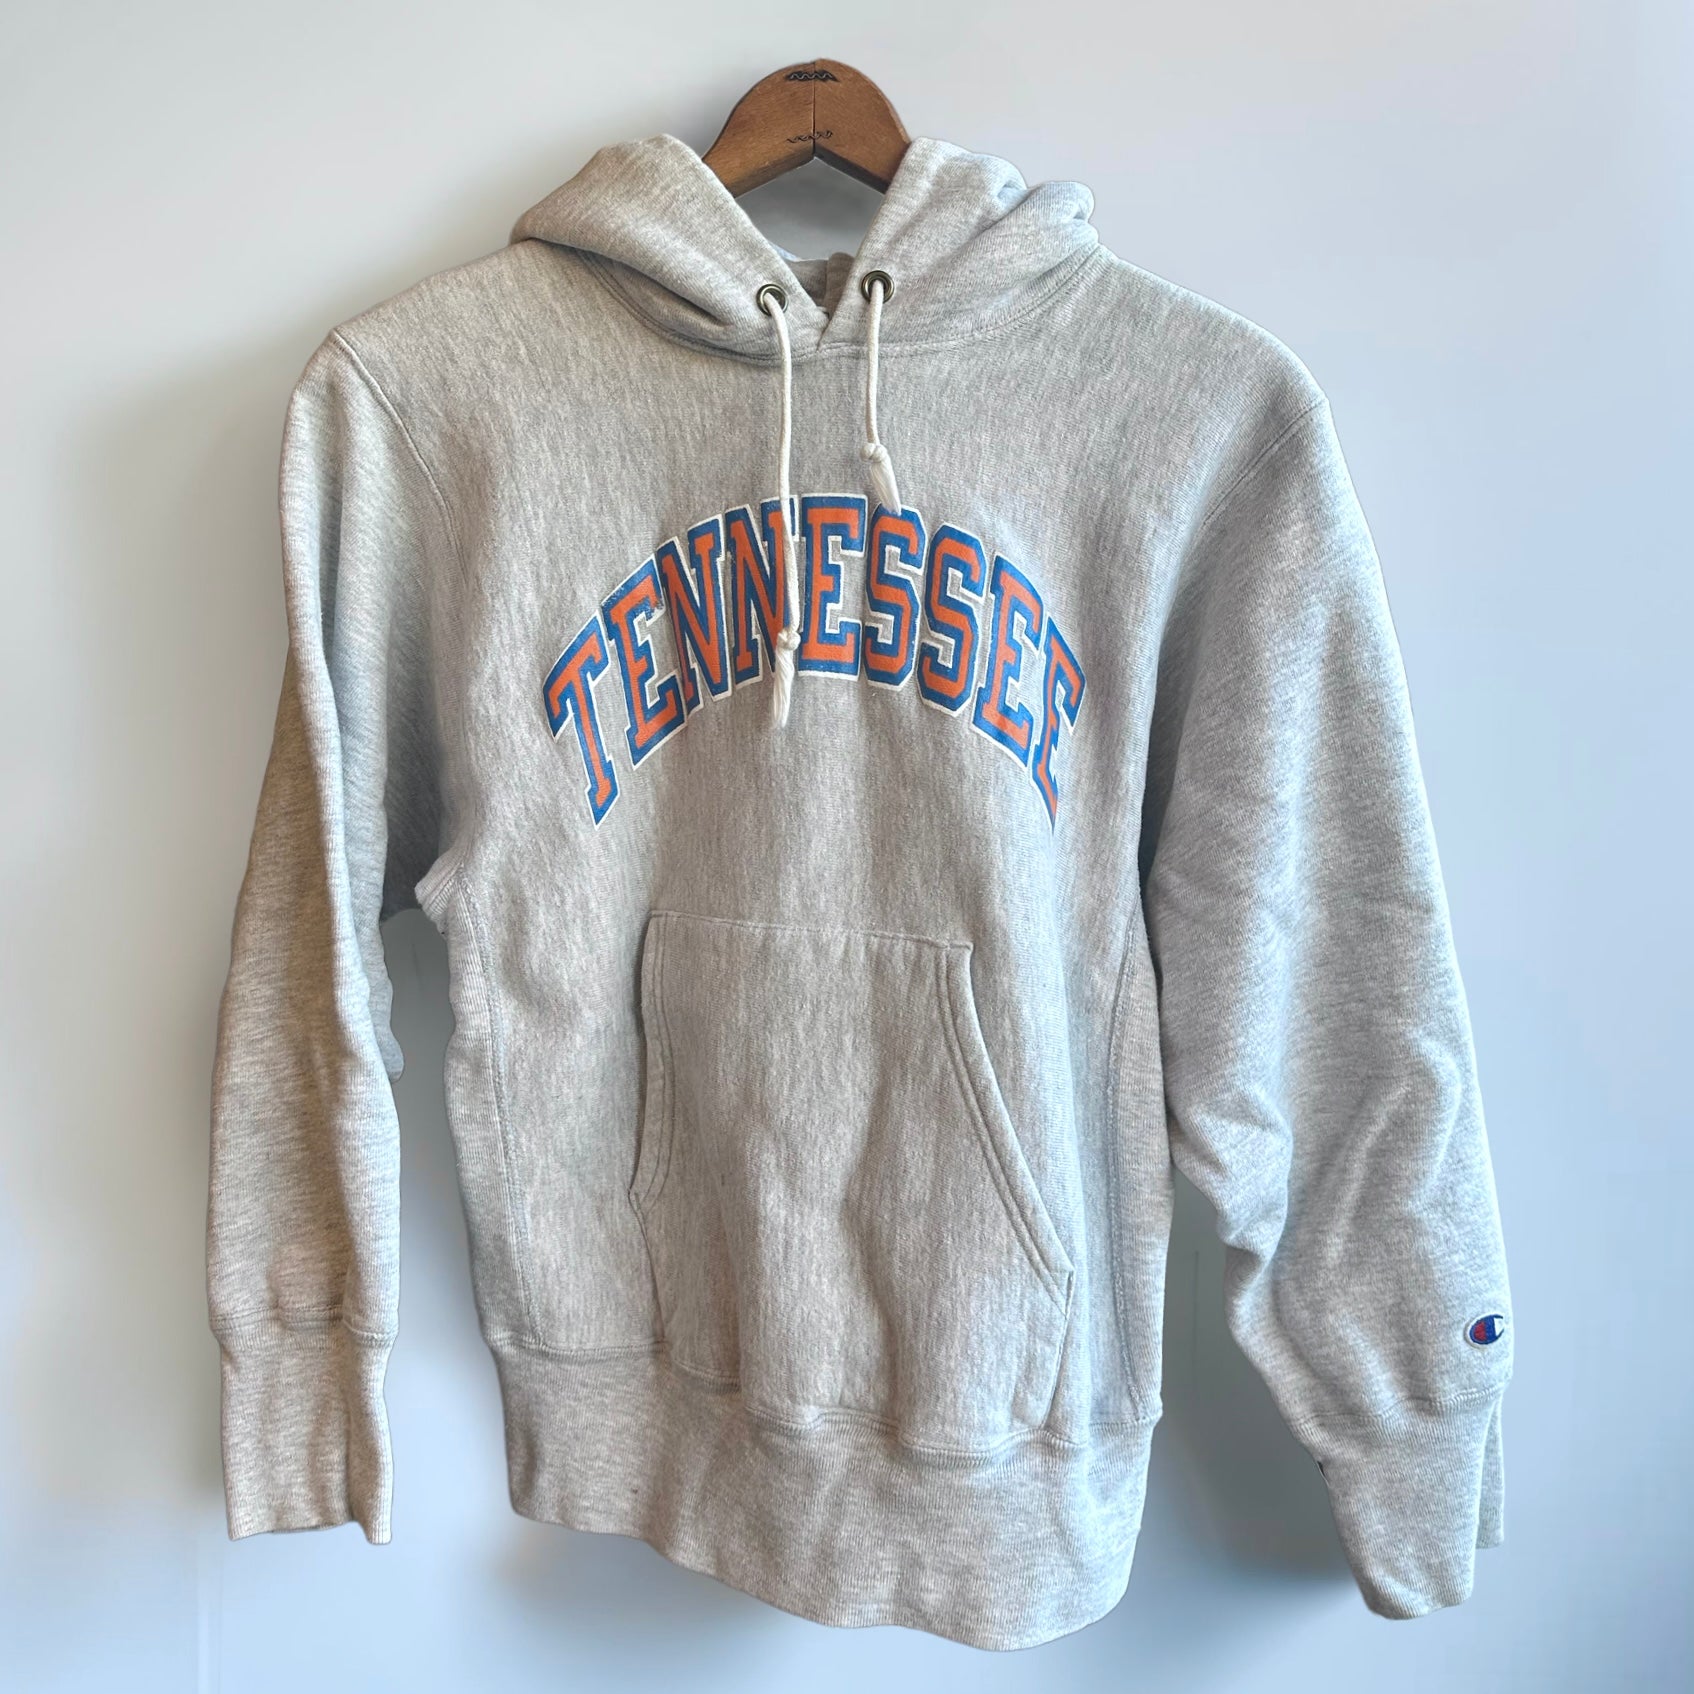 80's Tennessee Champion Reverse Weave warm up hoodie – The Lost